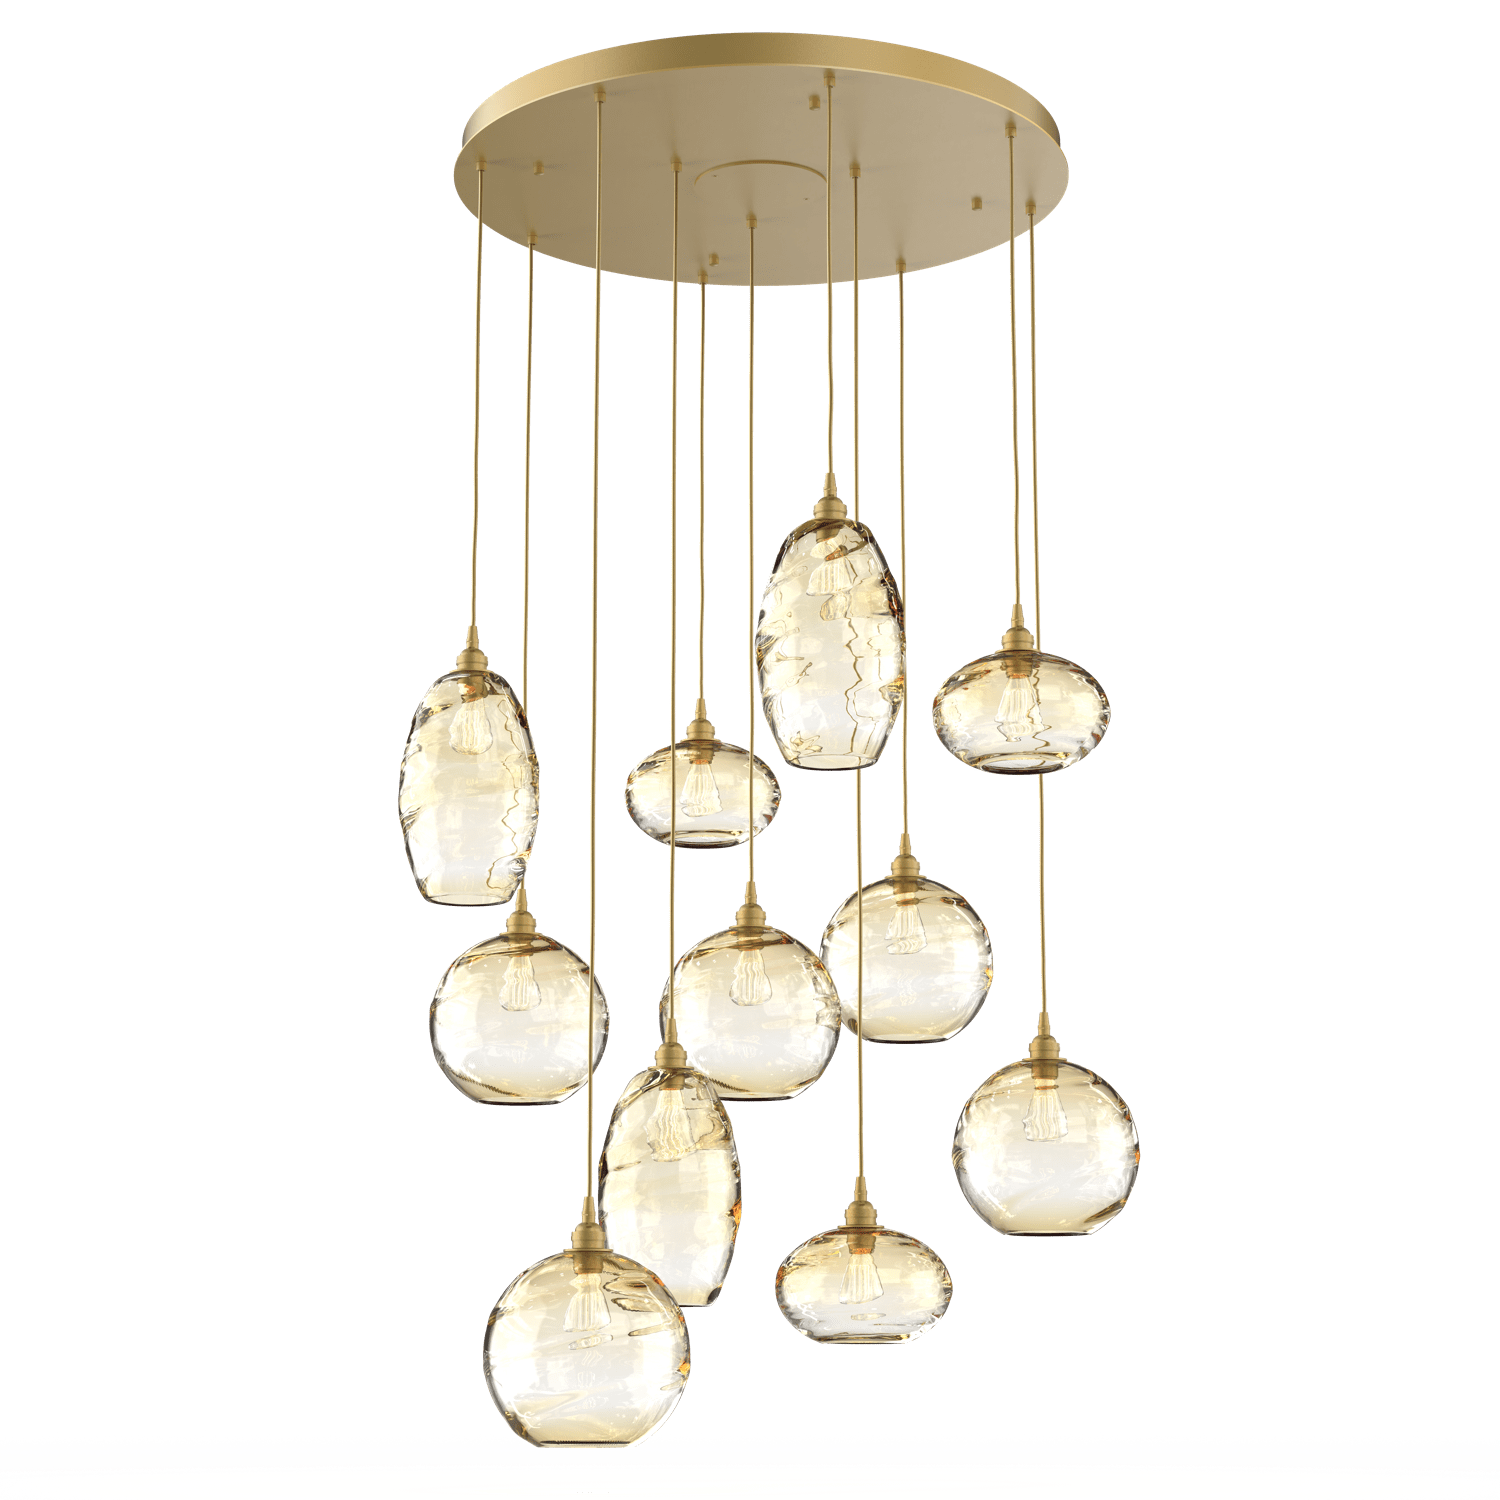 CHB0048-11-GB-OA-Hammerton-Studio-Optic-Blown-Glass-Misto-11-light-round-pendant-chandelier-with-gilded-brass-finish-and-optic-amber-blown-glass-shades-and-incandescent-lamping